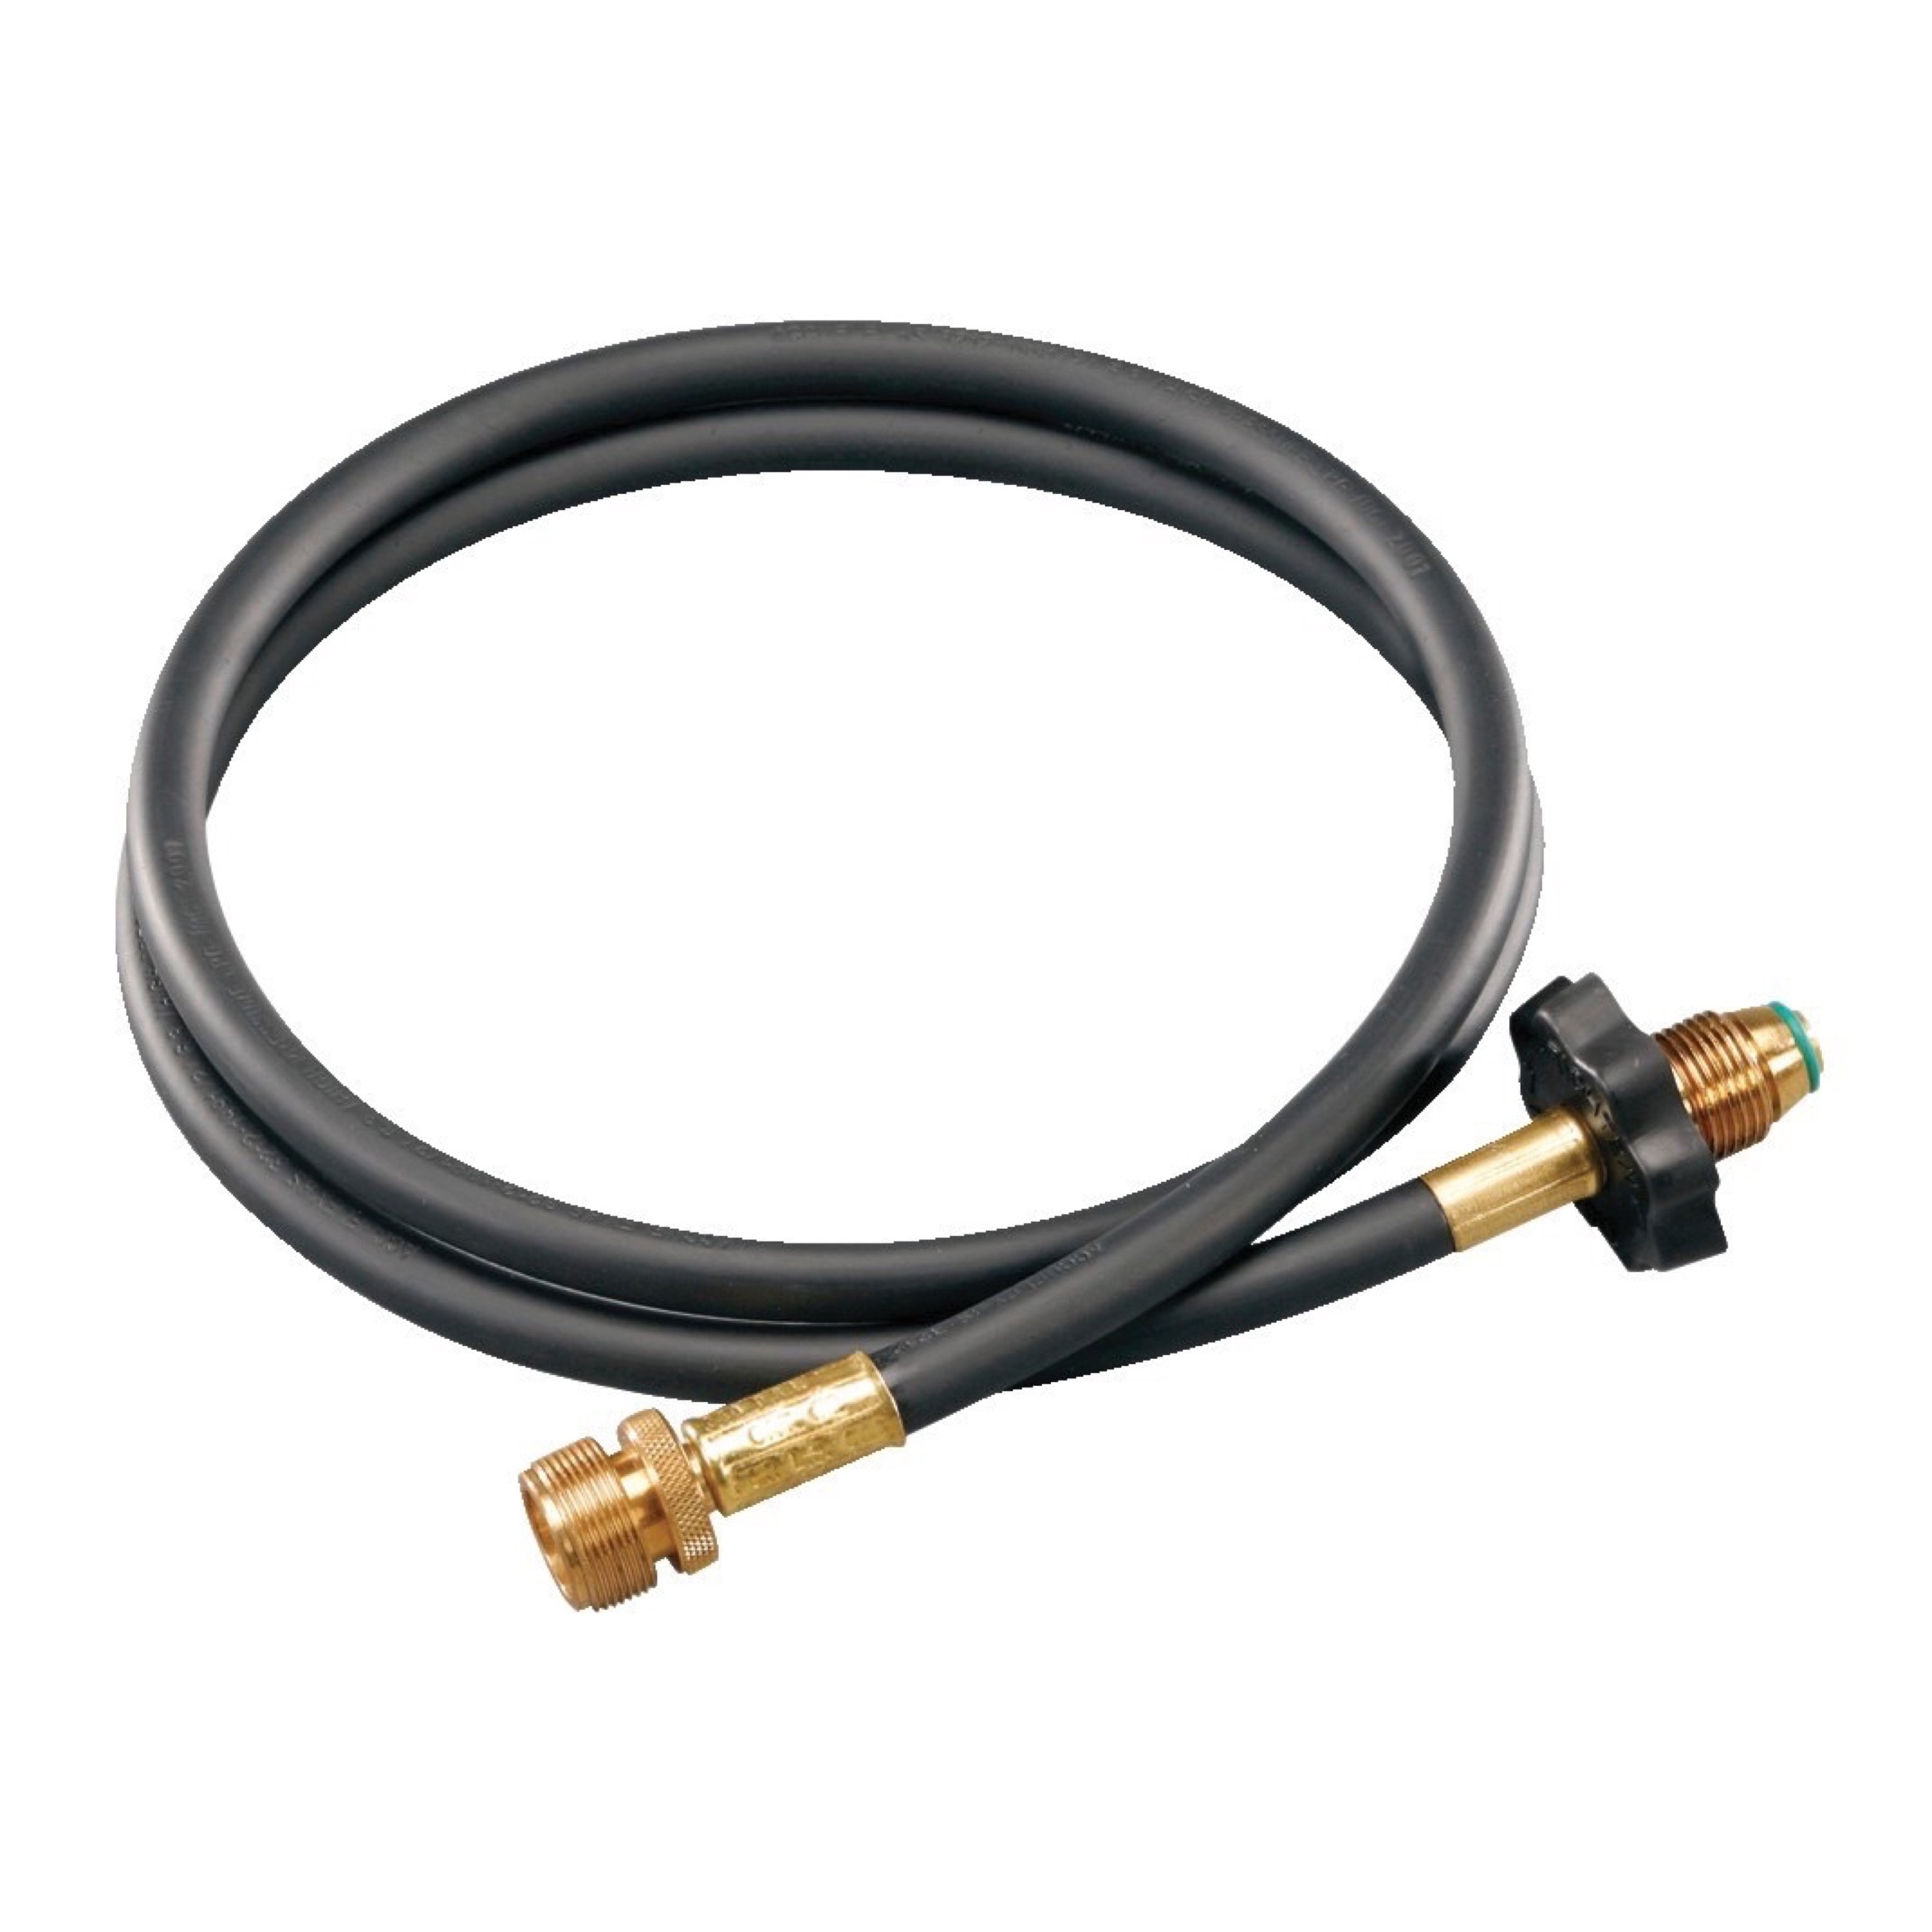 Coleman 5' High-Pressure Propane Gas Hose and Adapter Replacement - image 2 of 2